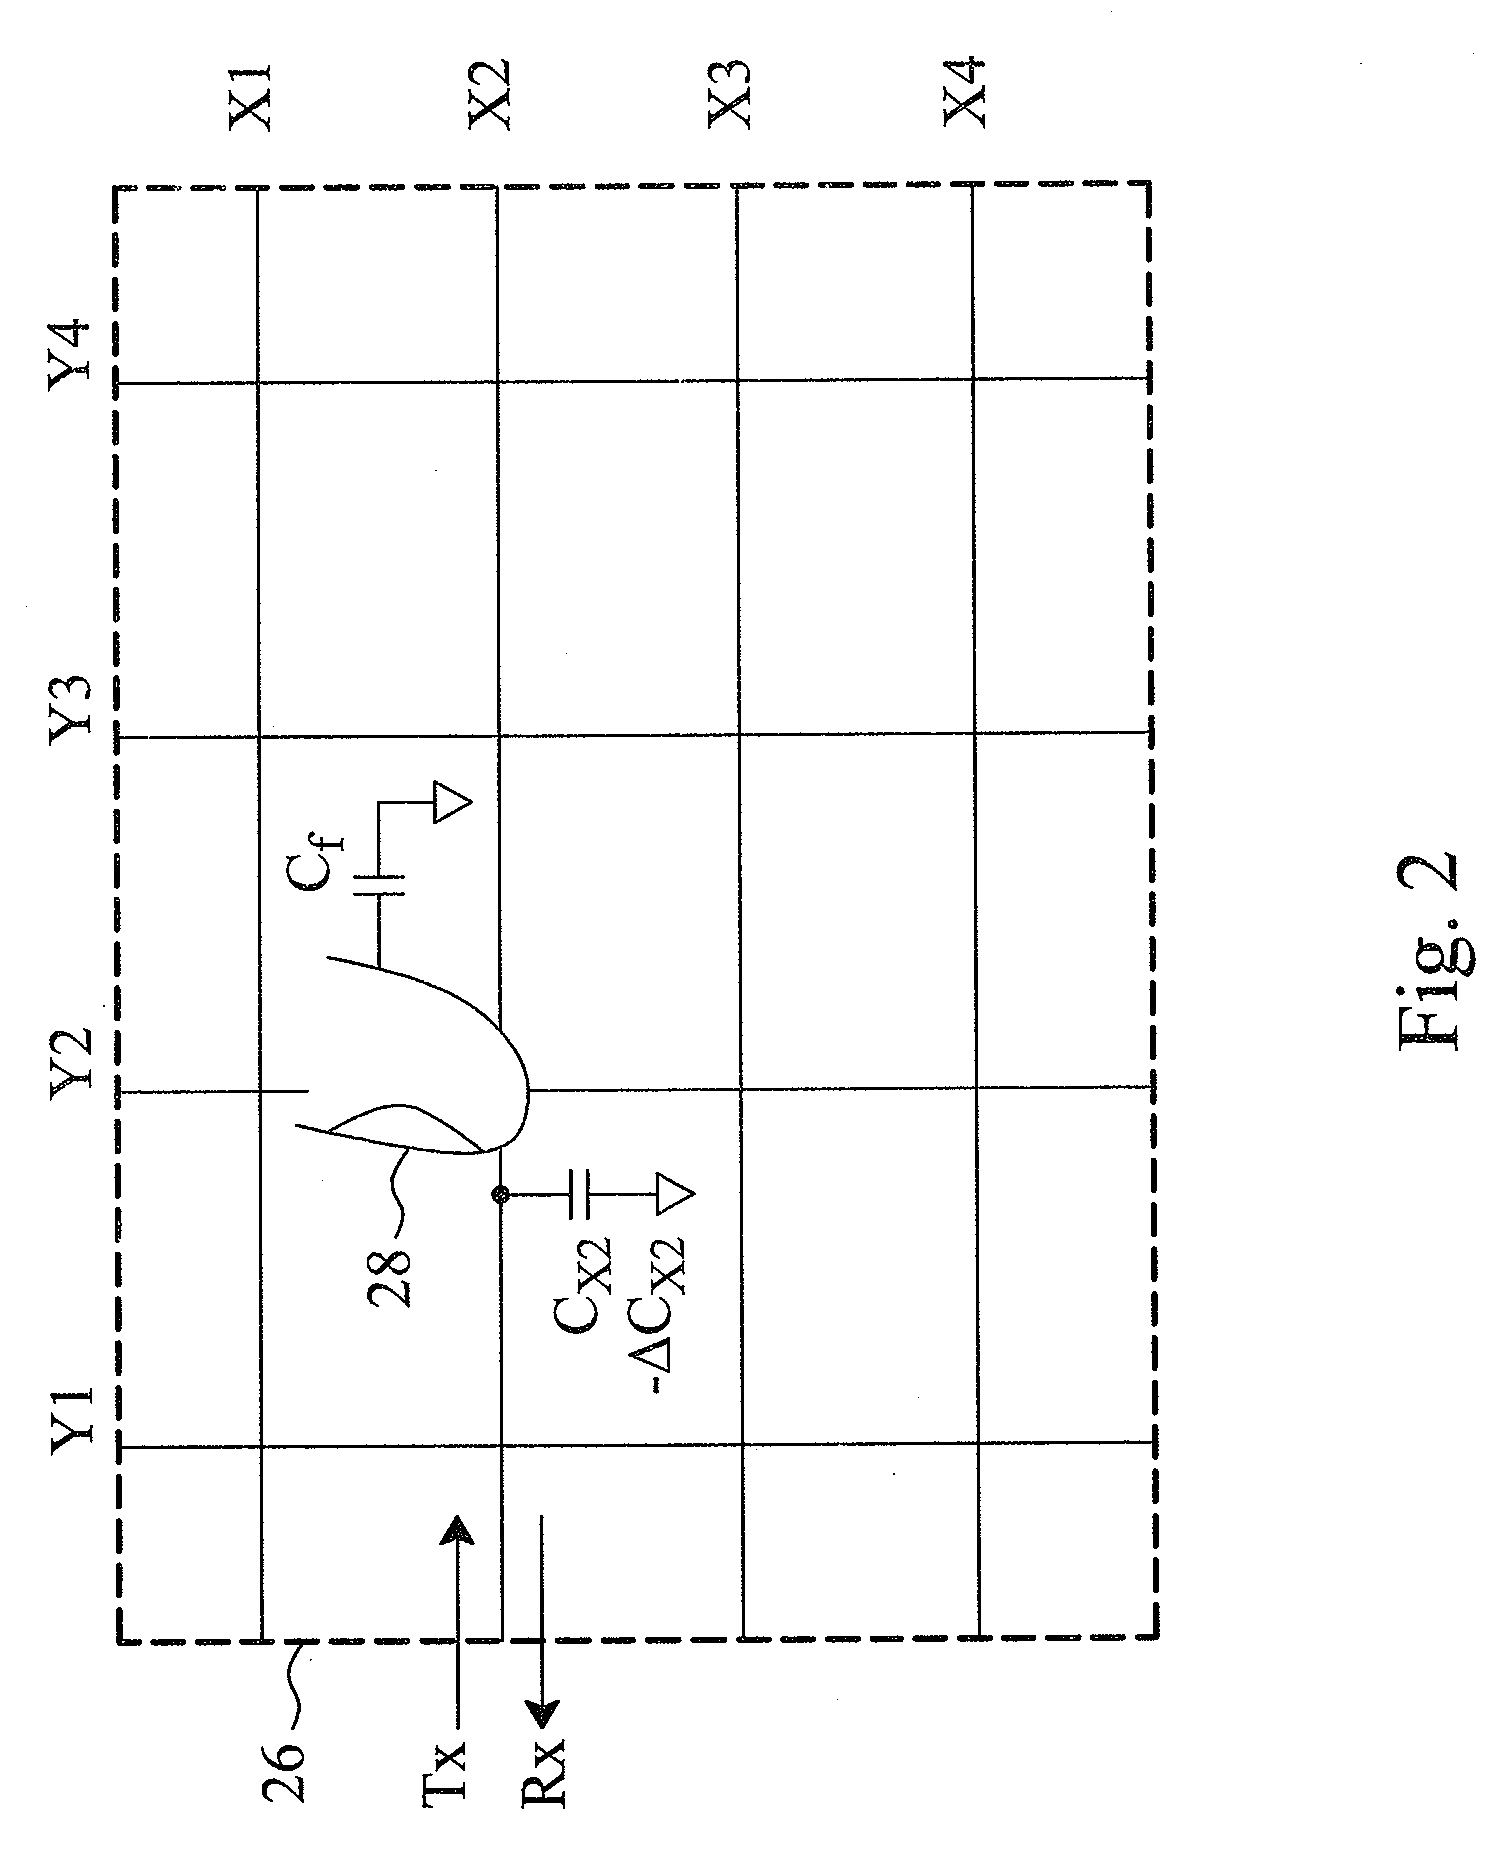 Statistical analyzing method and statistical quality indicator for reliability improvement of a capacitive touch device